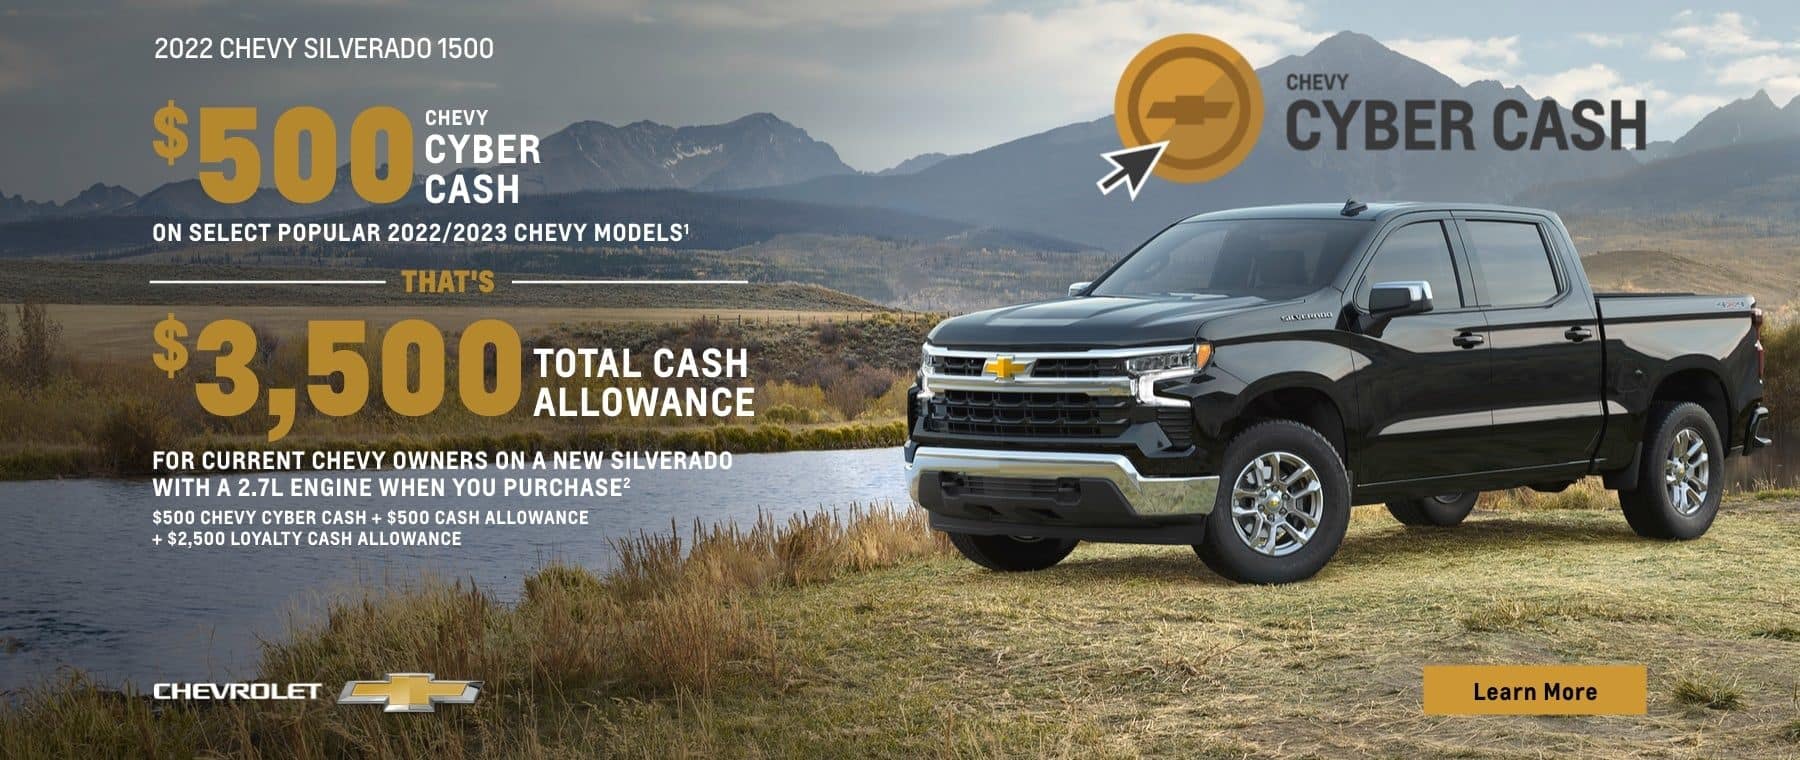 $500 Chevy Cyber Cash on select popular 2022/2023 Chevy models. That's $3,500 total cash allowance for current Chevy owners on a new Silverado with a 2.7L engine when you purchase. $500 Chevy Cyber Cash + $500 Cash Allowance + $2,500 Loyalty Cash Allowance